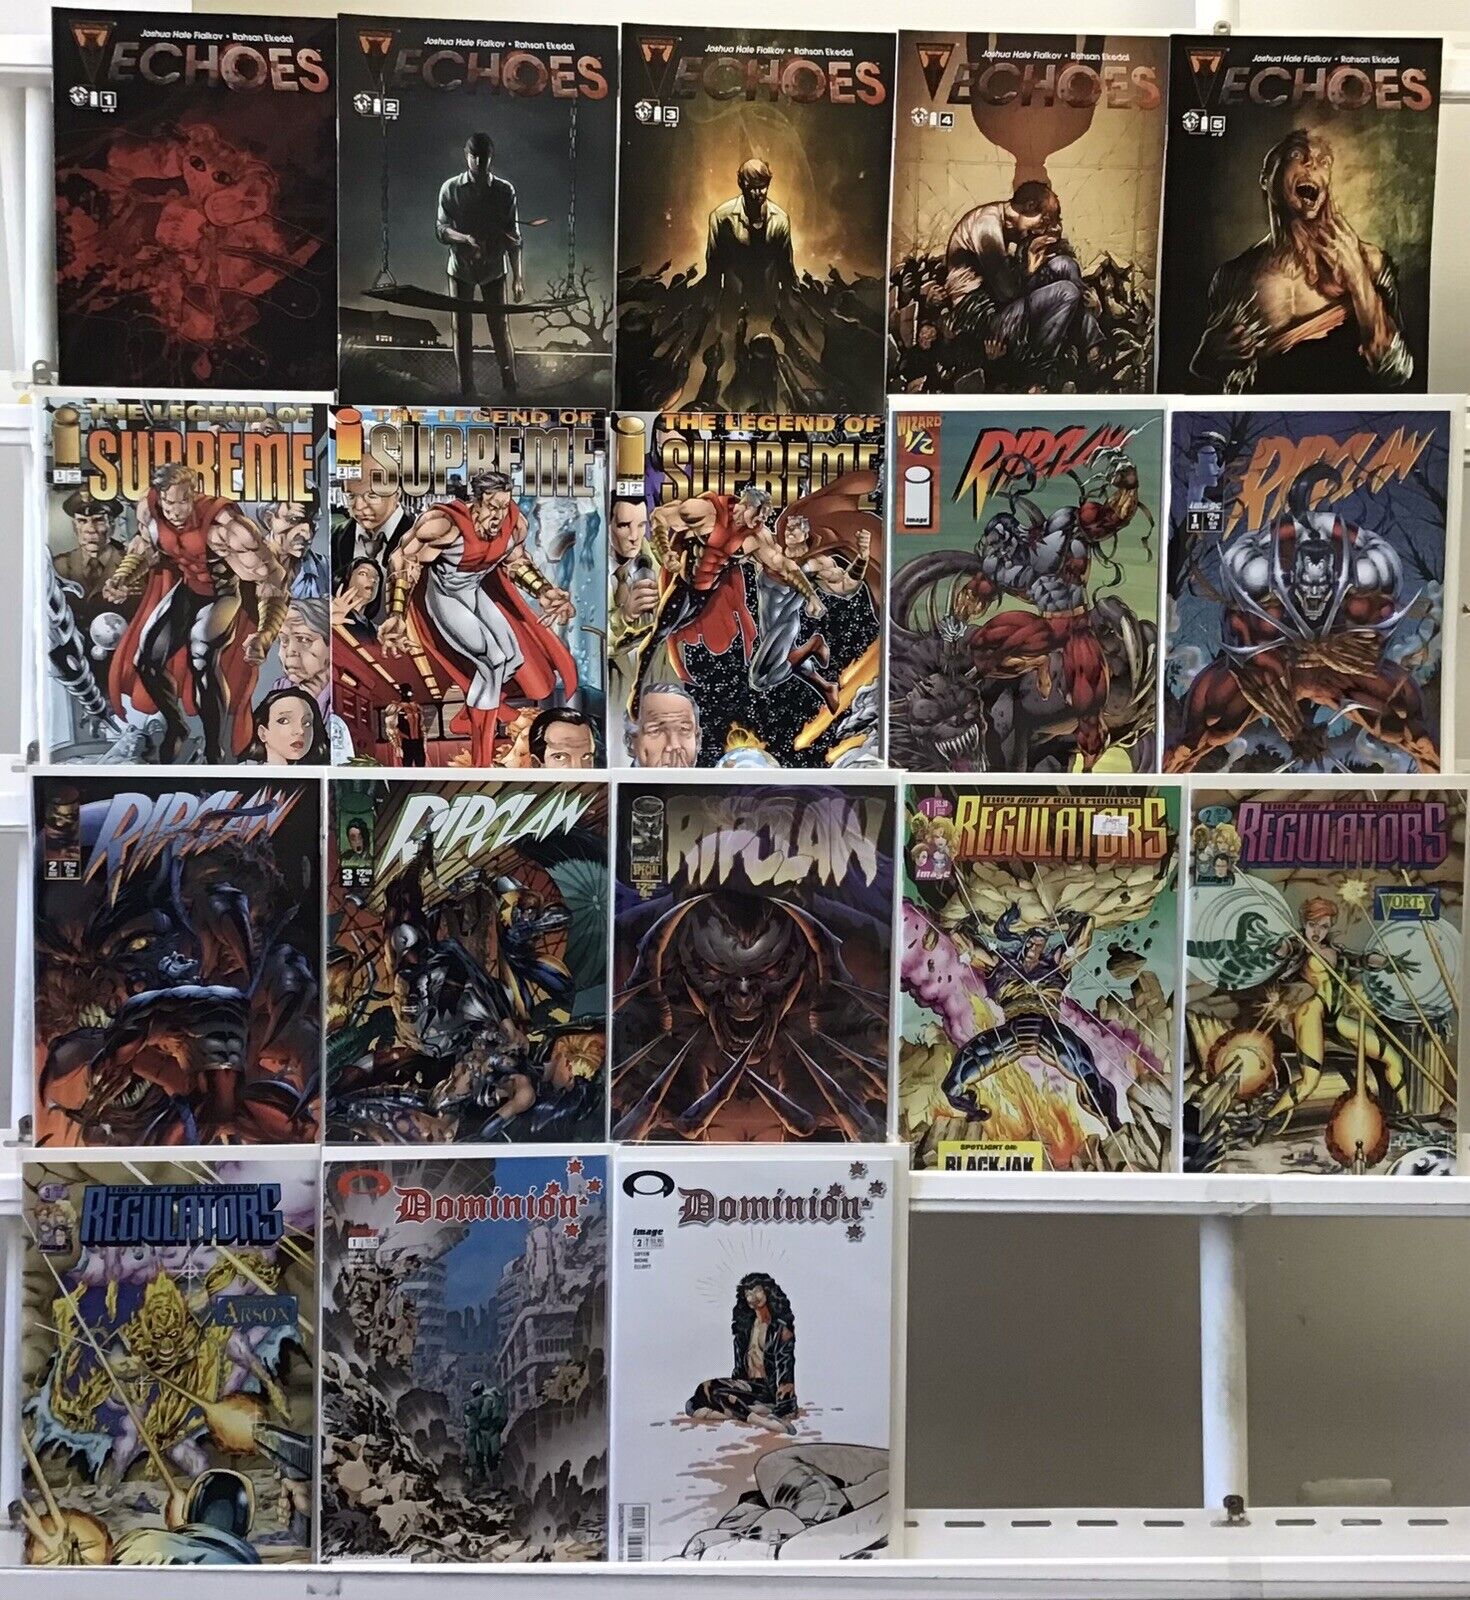 Image Comic Sets - Echoes, Ripclaw, The Legend of Supreme - See Bio